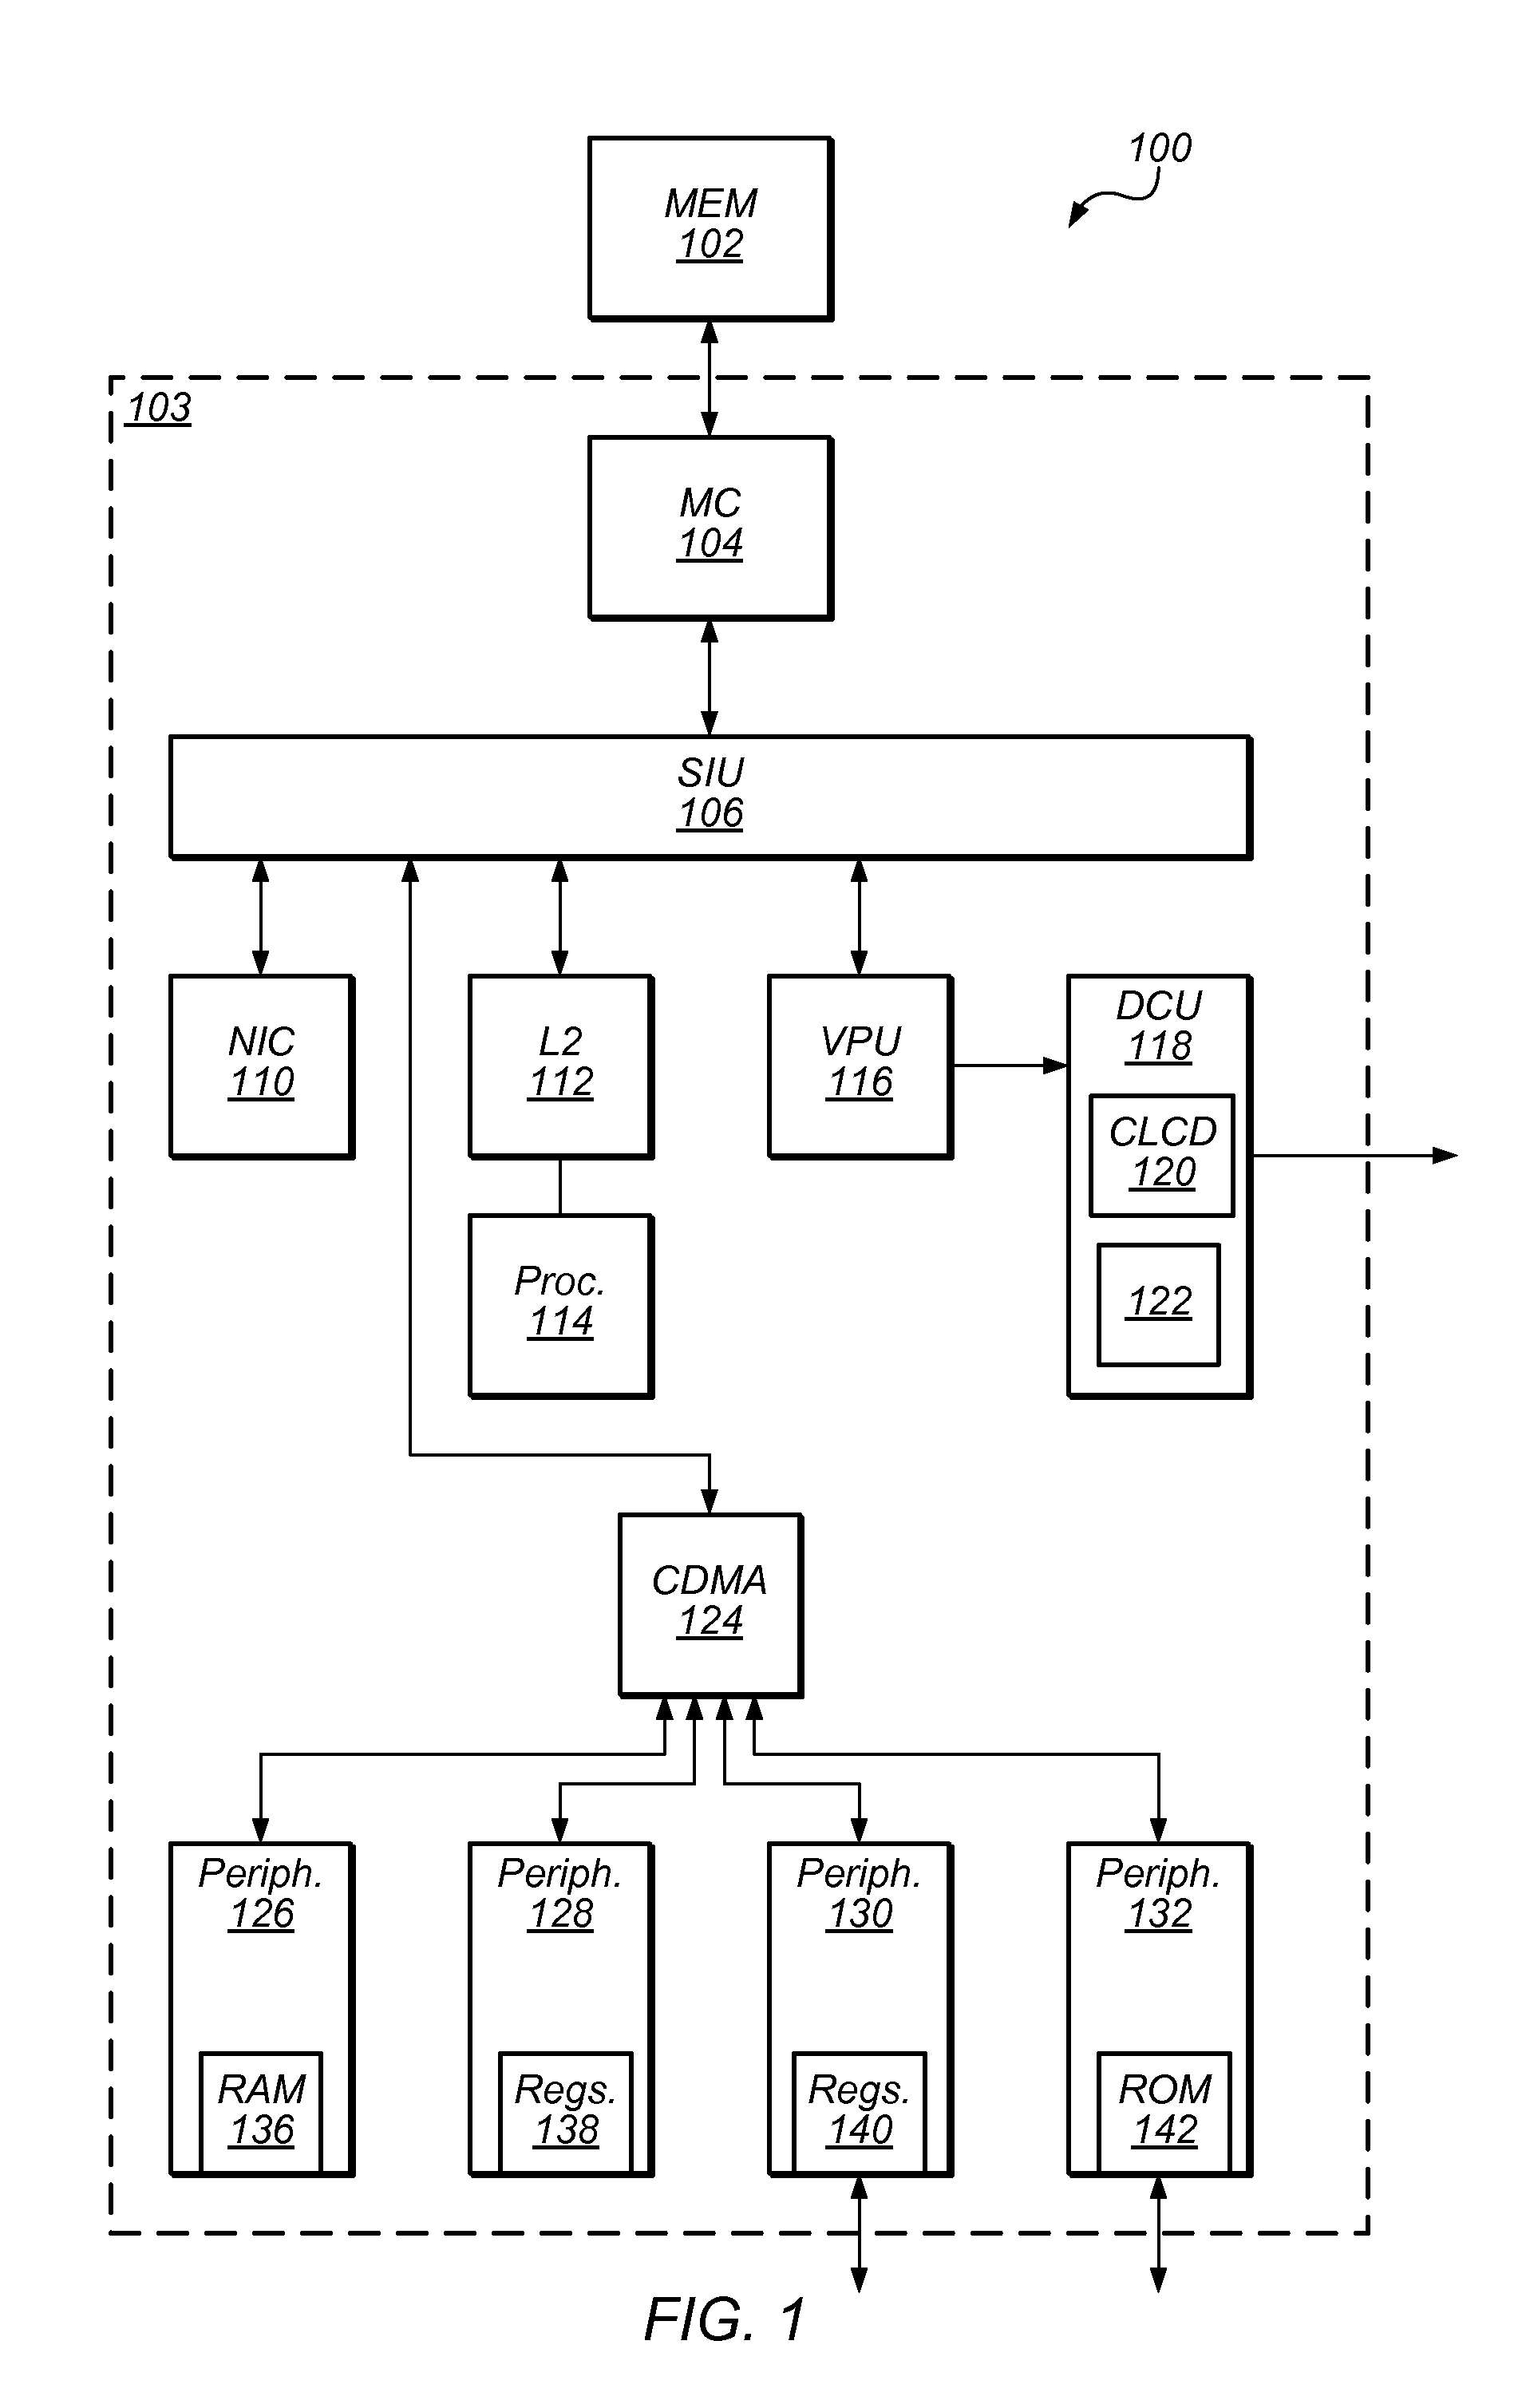 User interface unit for fetching only active regions of a frame